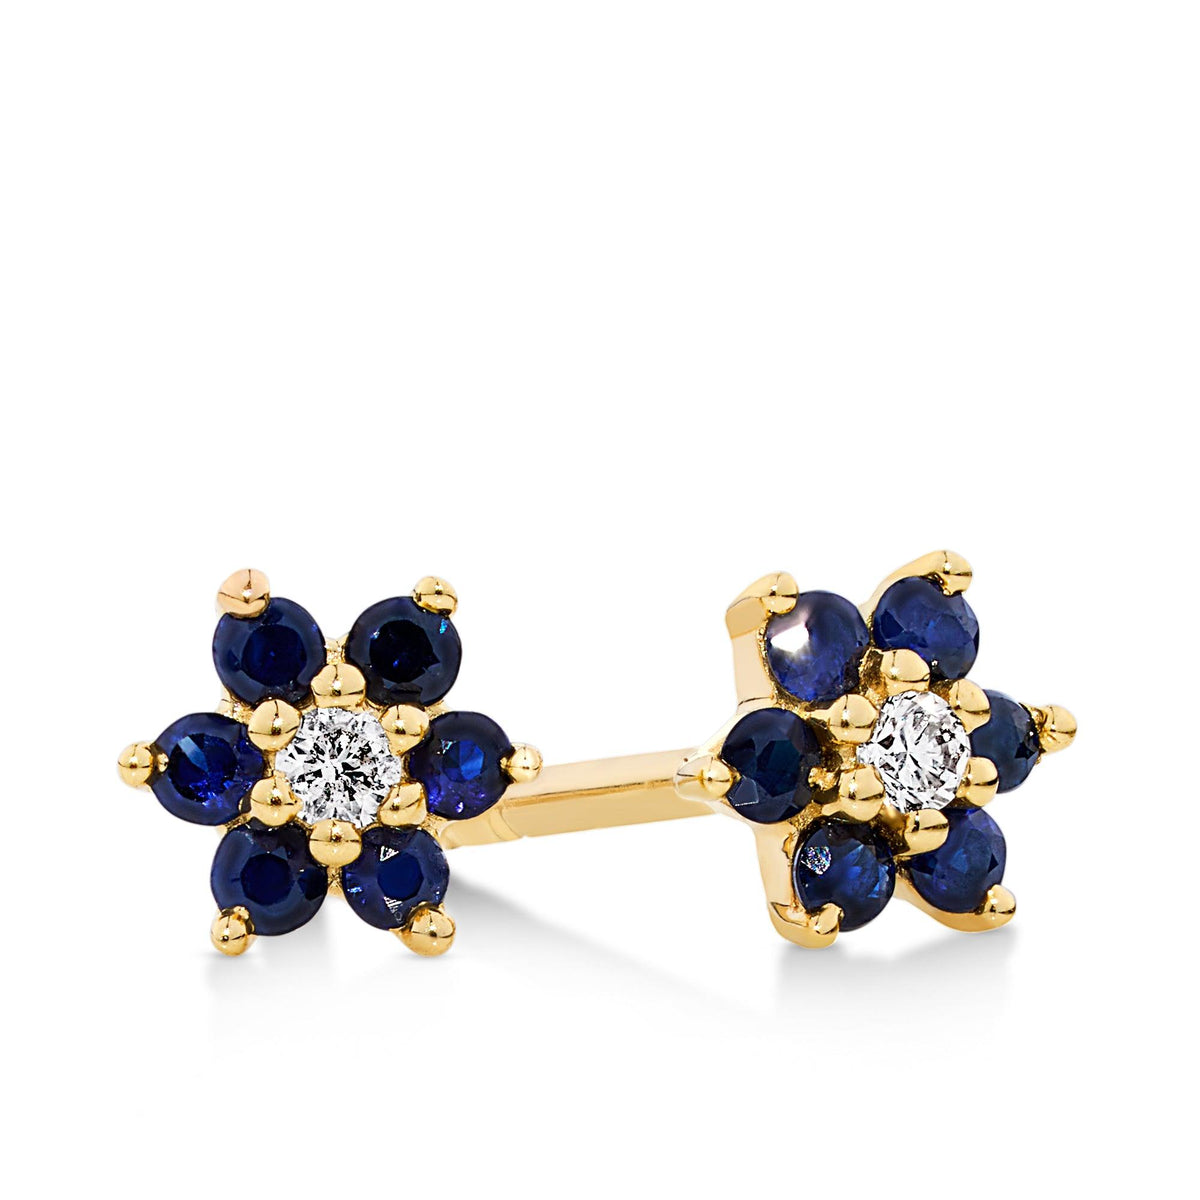 Blue Sapphire & Diamond Petite Flower Earrings in 9ct Yellow Gold - Wallace Bishop